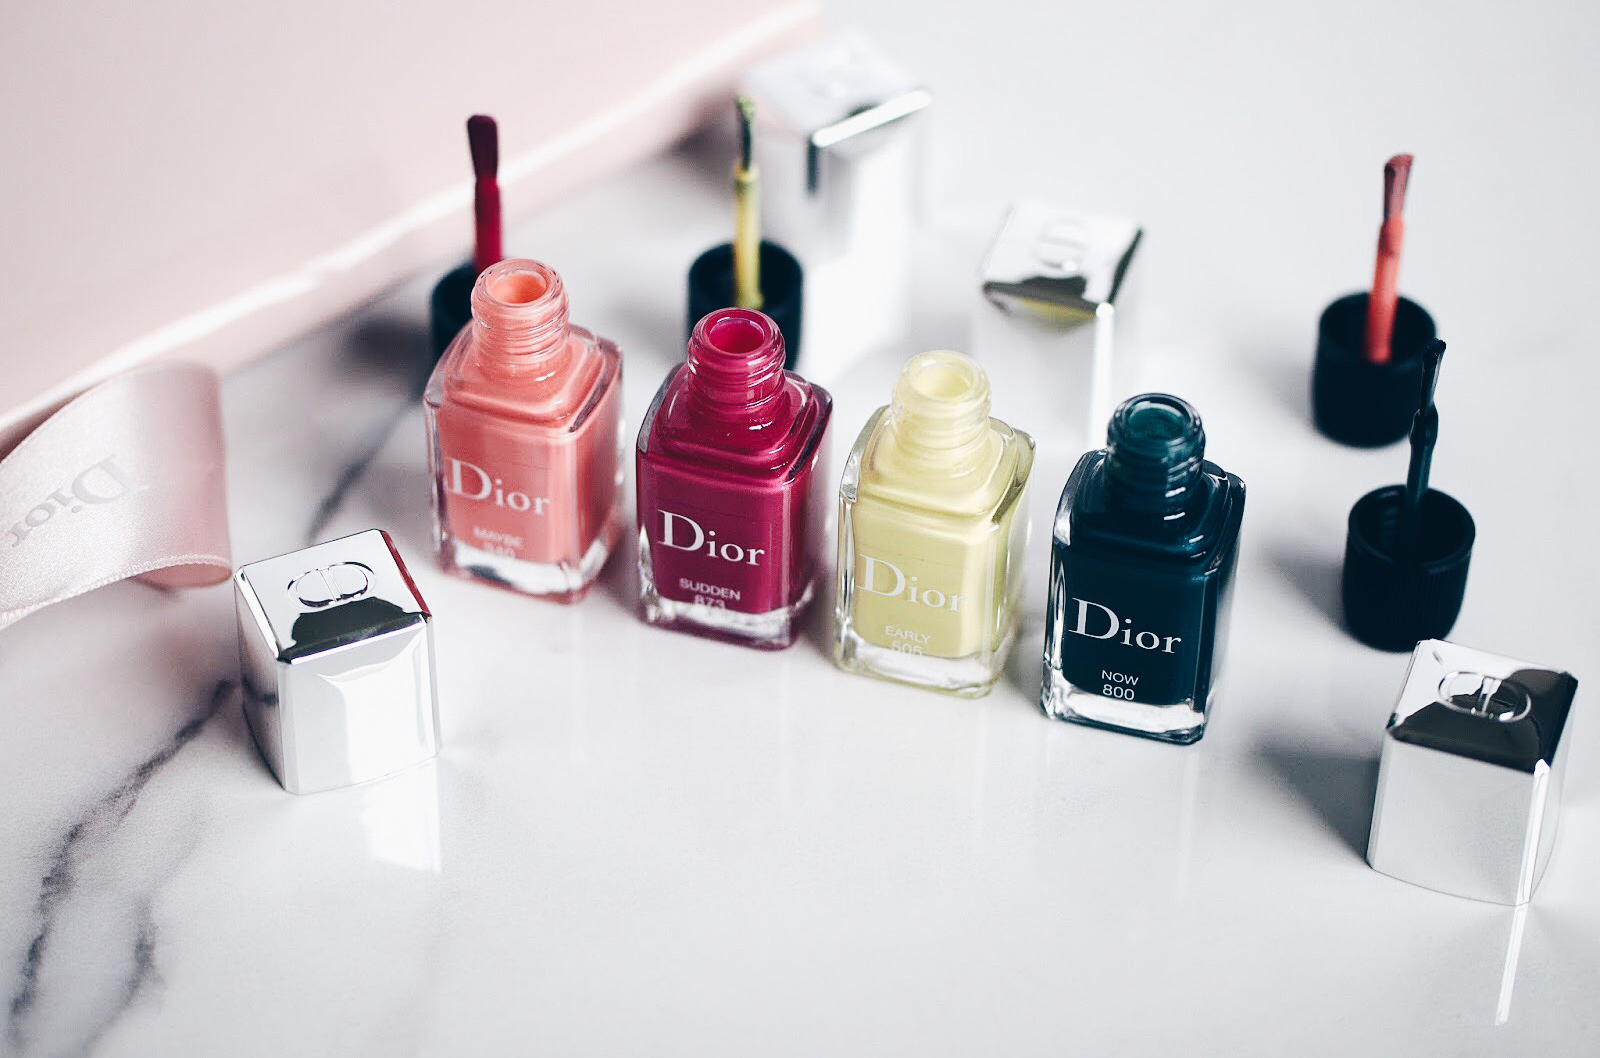 dior vernis printemps 2017 340 maybe 800 now 873 sudden 505 Early avis test swatches